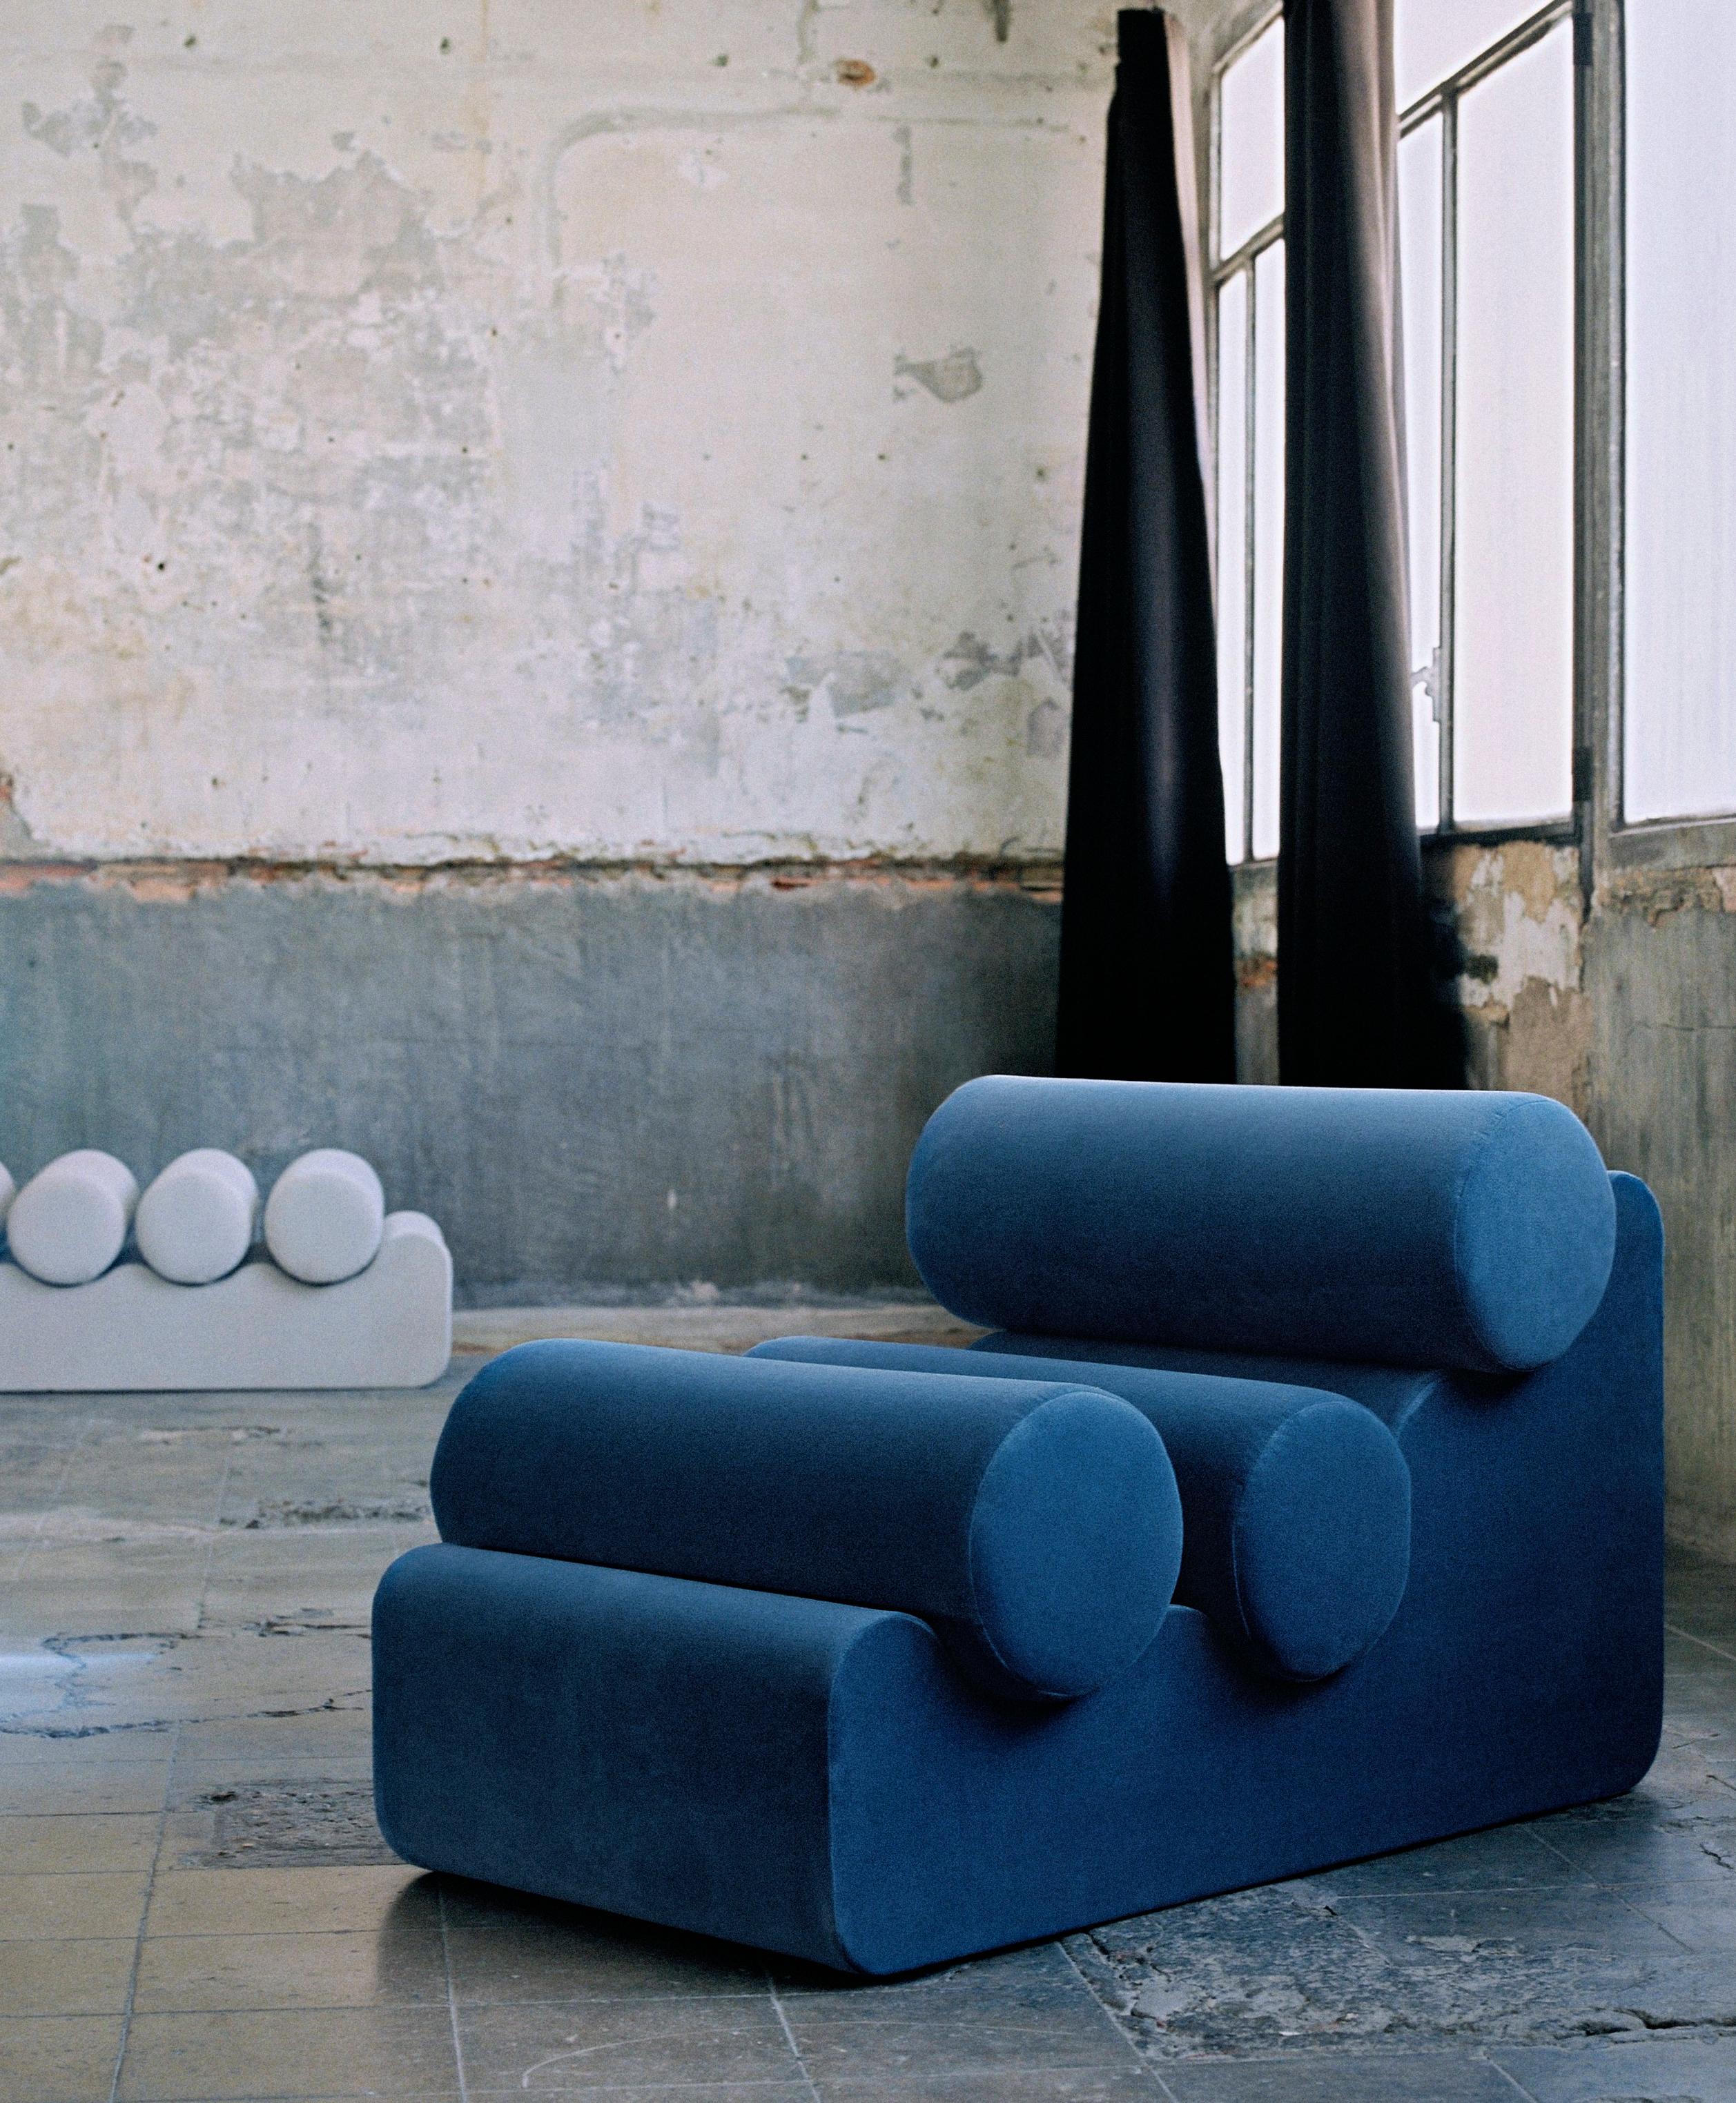 Pepino chair by Owl
Dimensions: L 112 x W 70 x H 60 cm
Materials: Plywood base, upholstered 

La Pepino is a collection of only seating, which consists of the repetition of cylindrical cushions, supported by an organically shaped base. Every